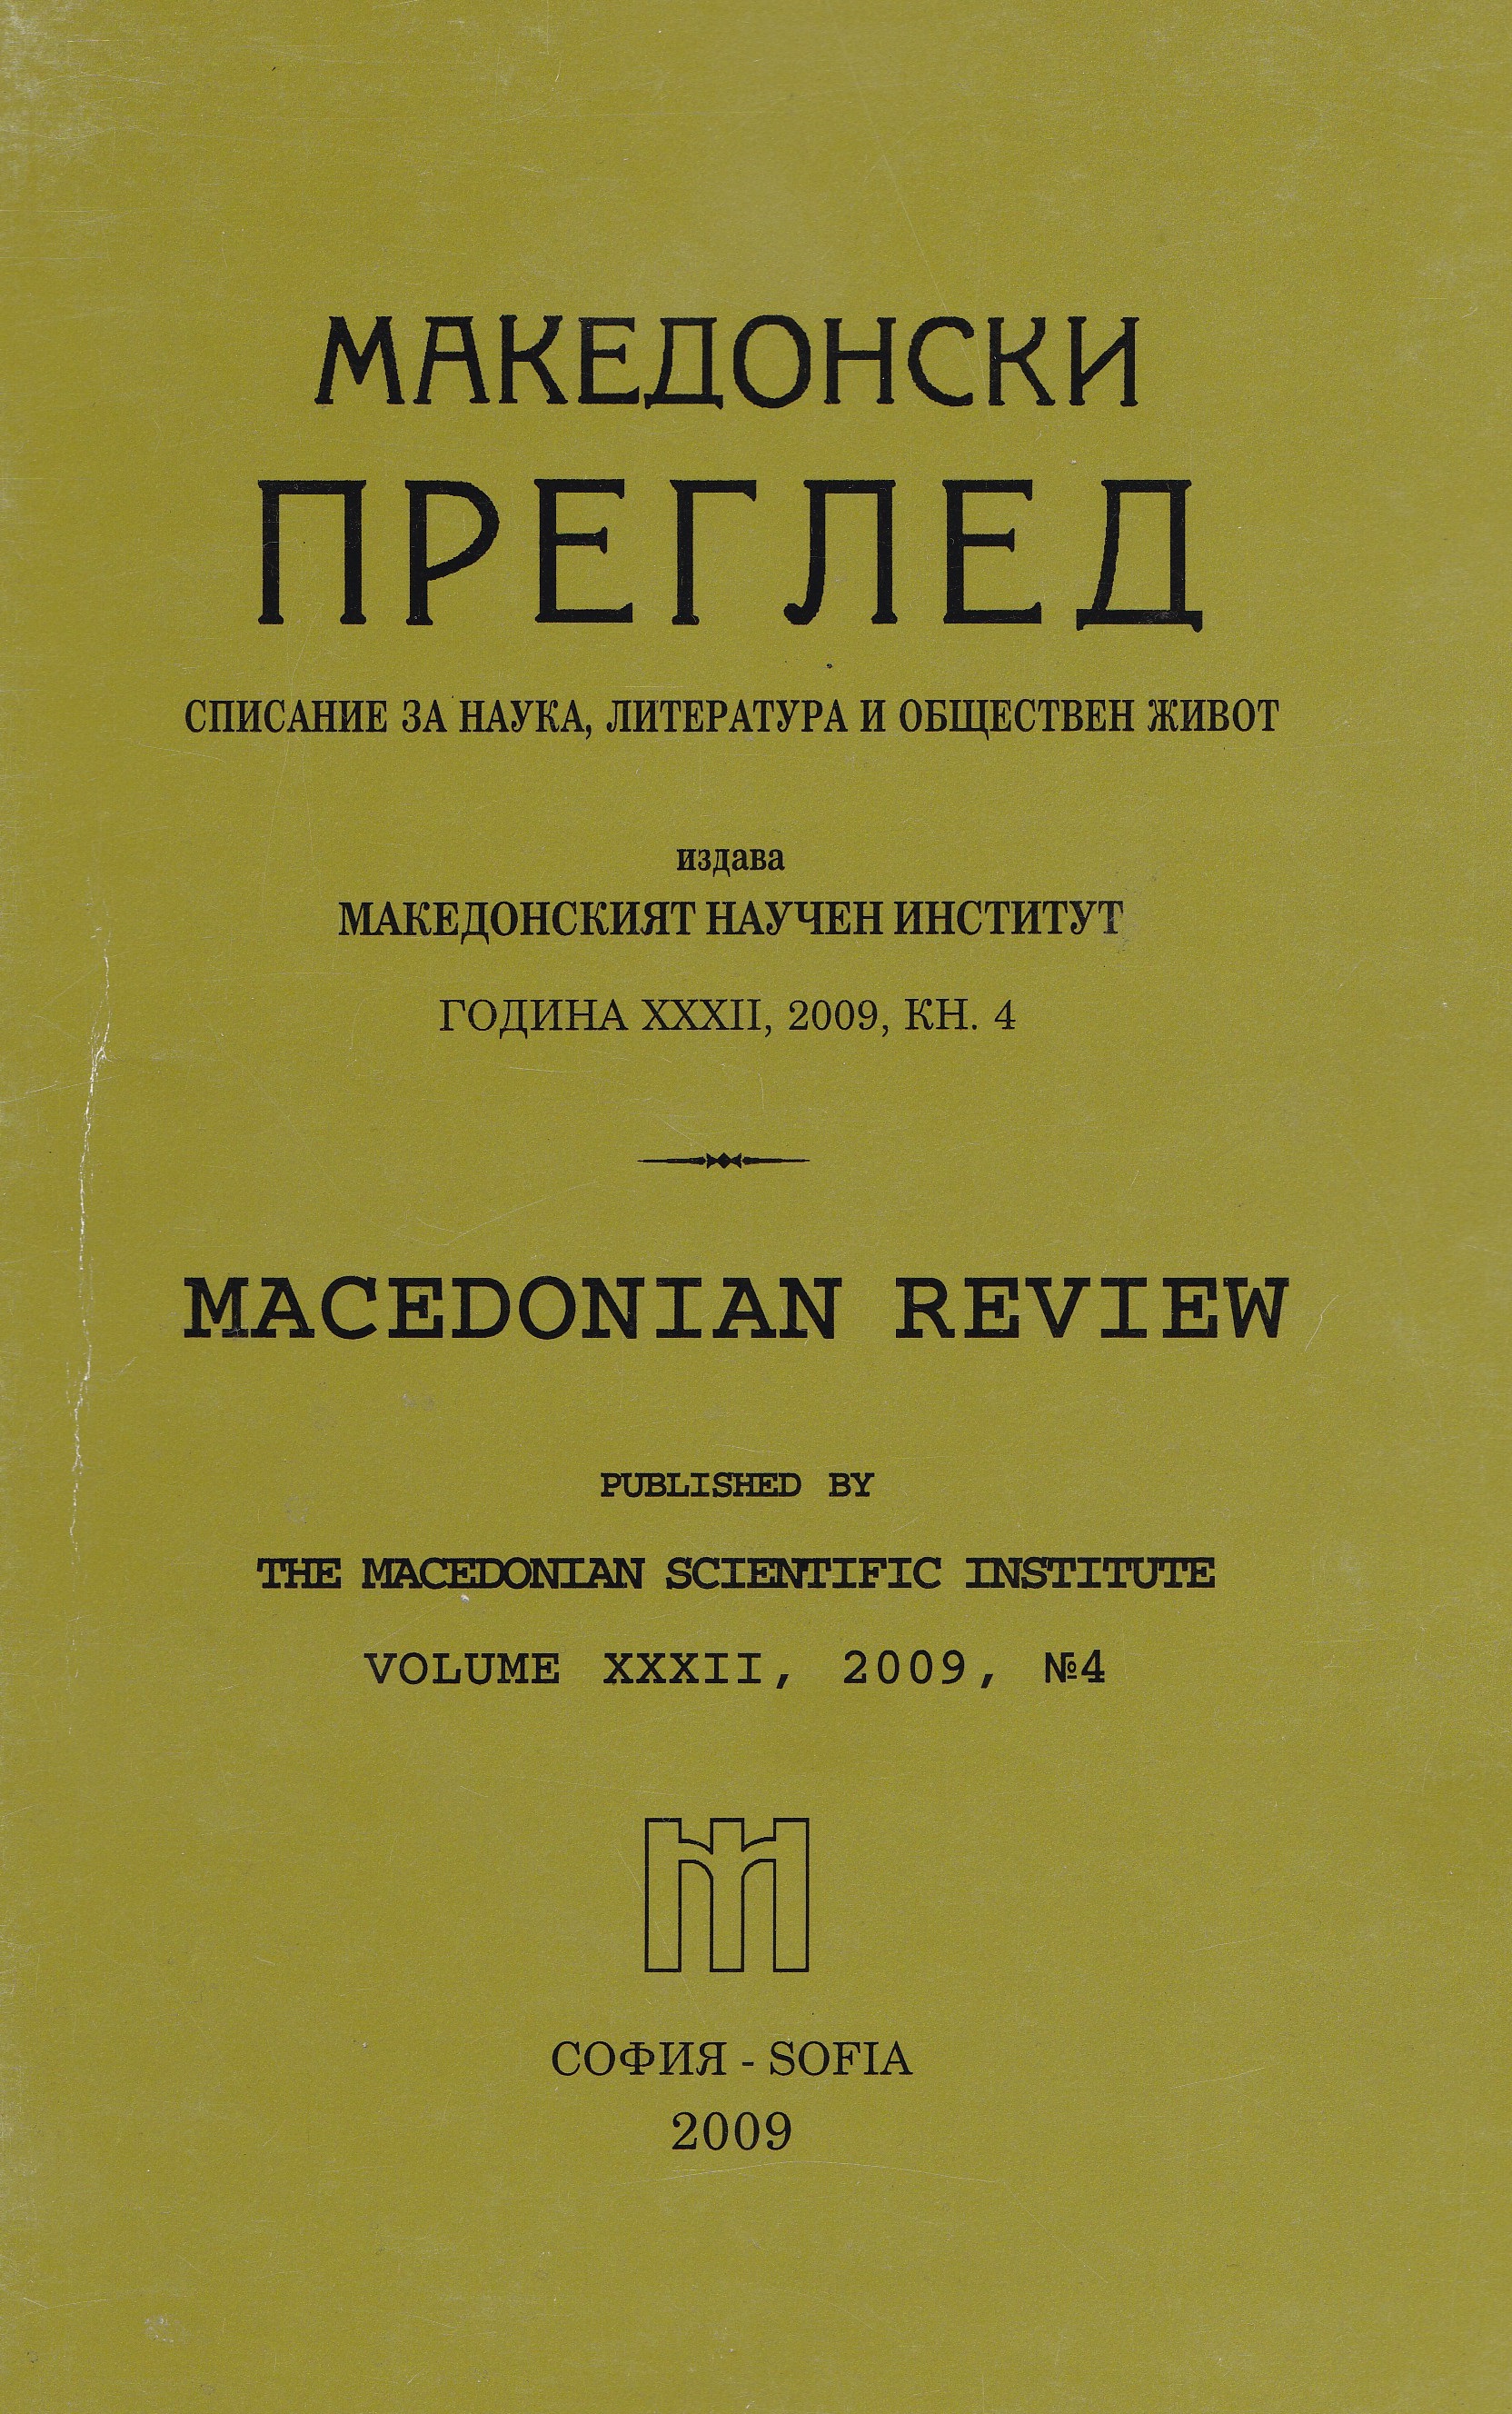 About the "gaps" or historiography speculations on the Bulgarian historiography of the Macedonian question Cover Image